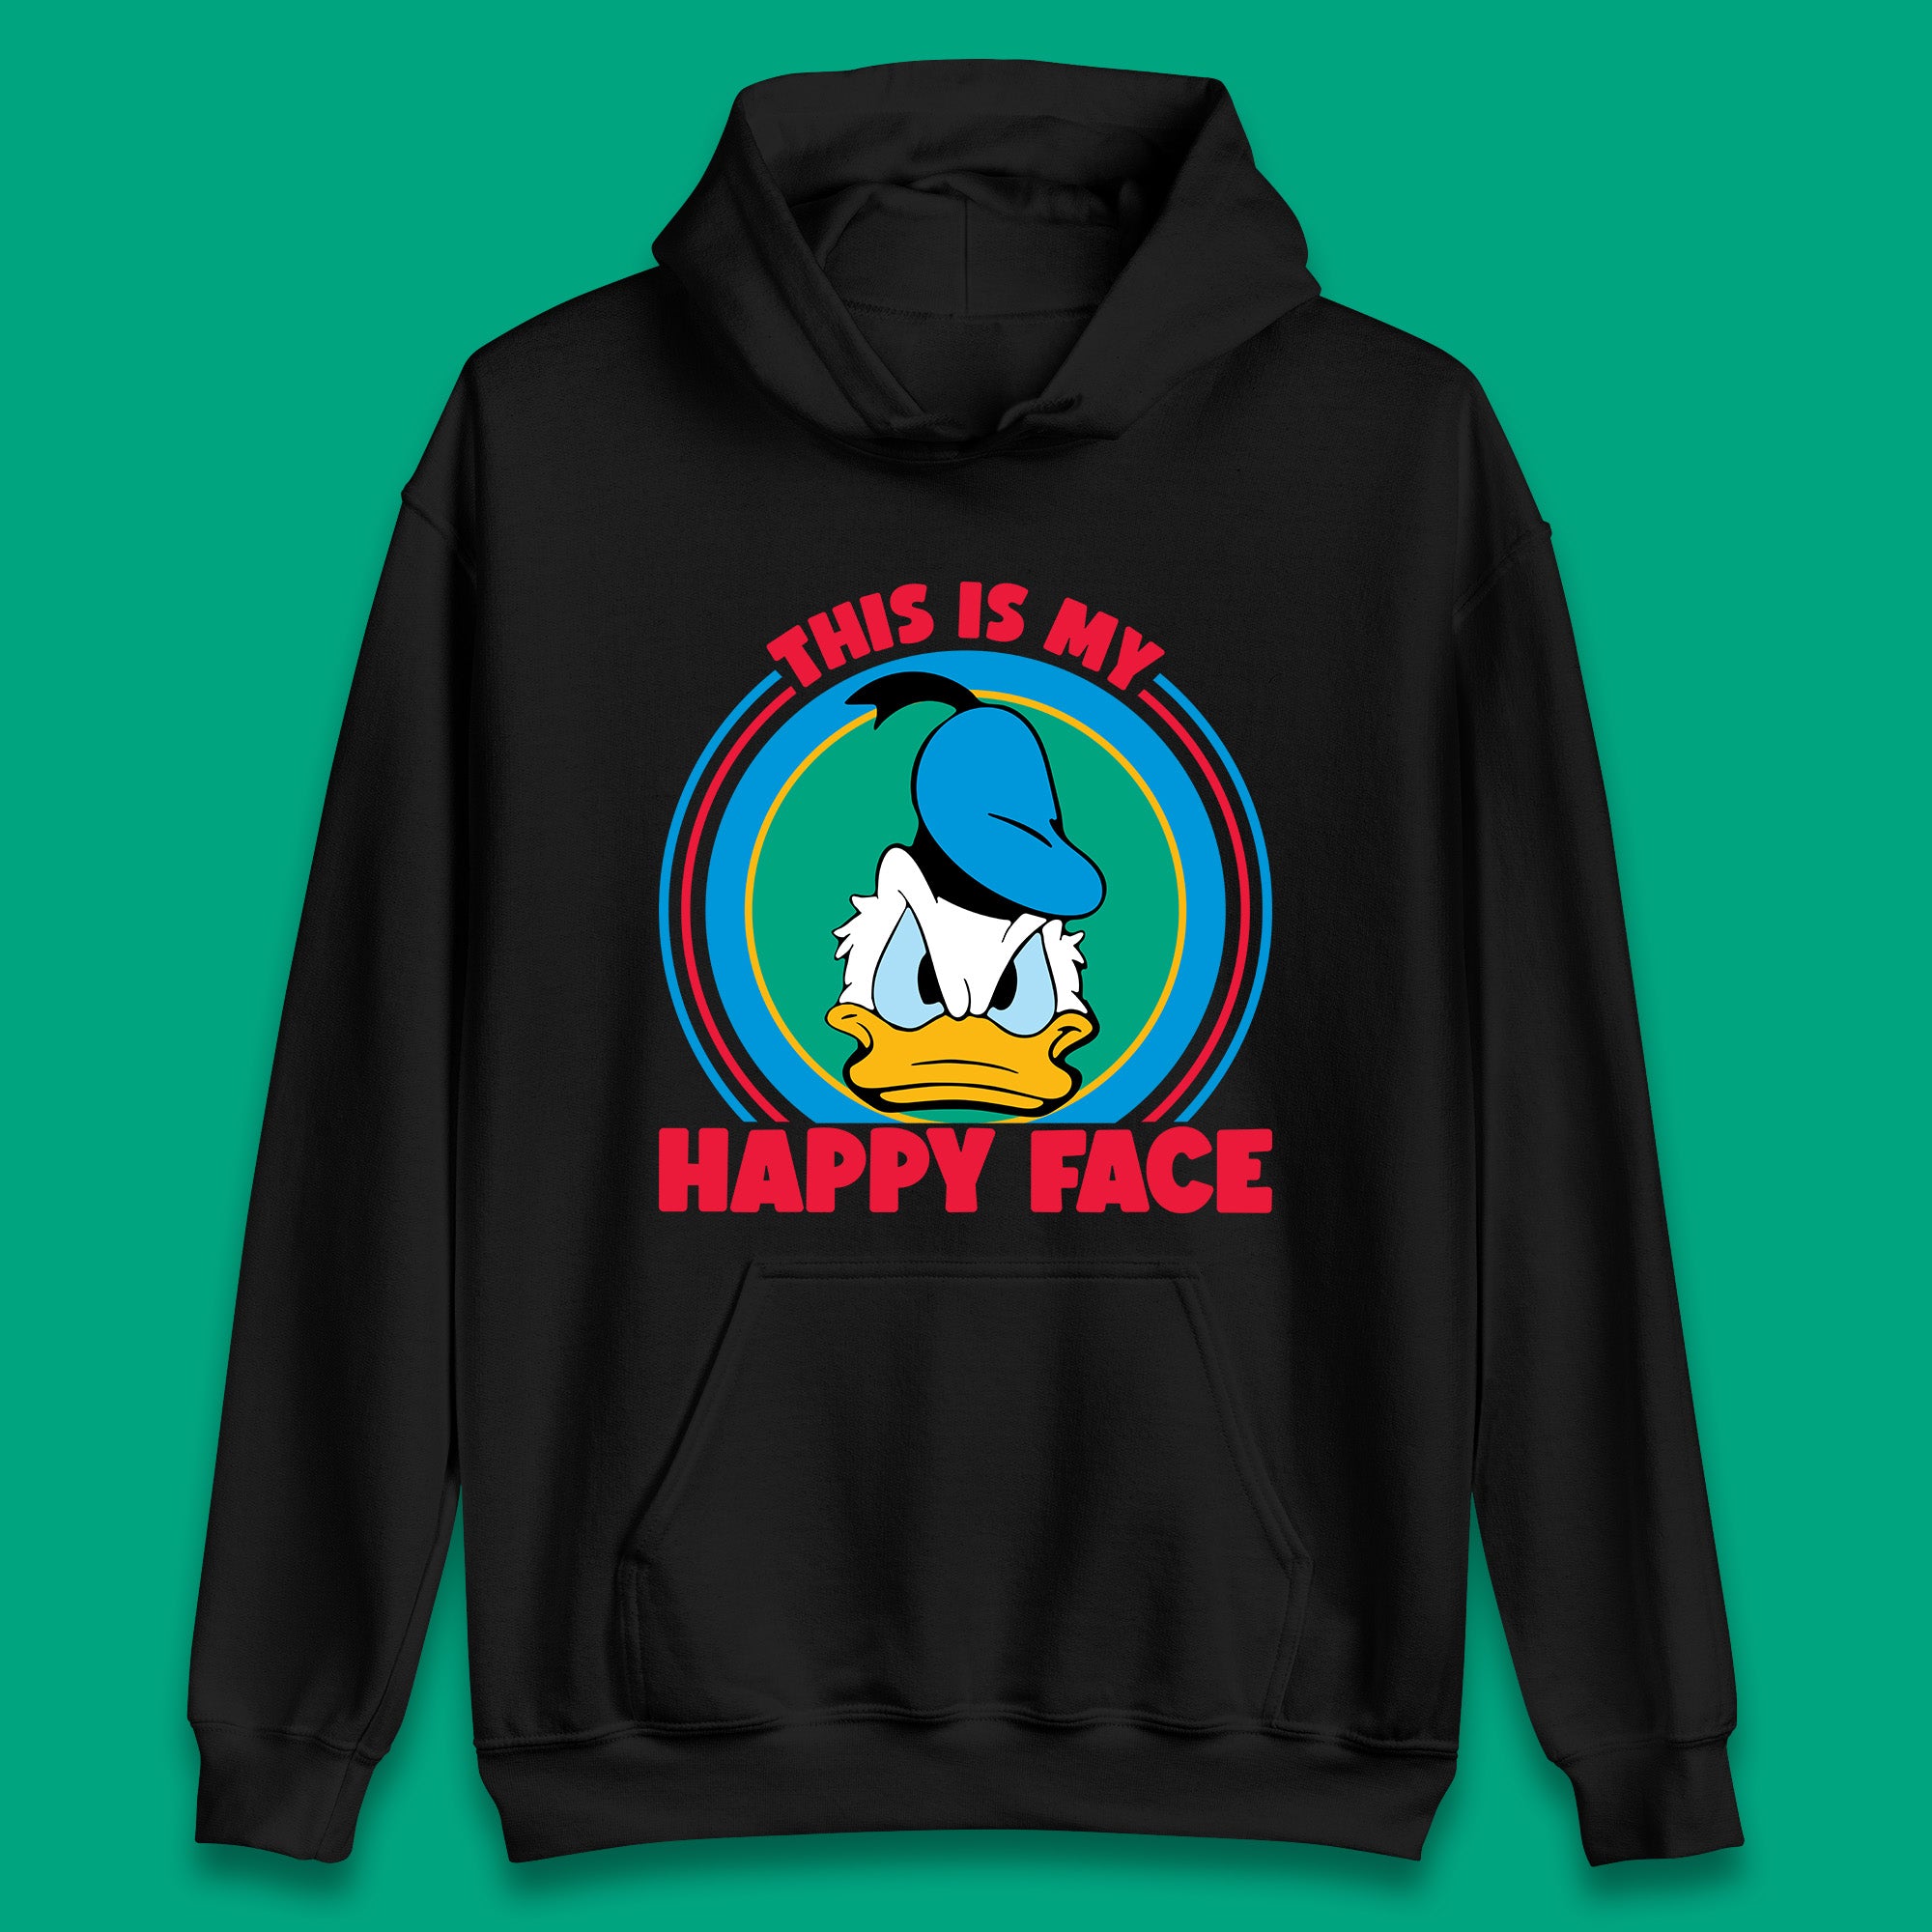 This Is My Happy Face Donald Duck Funny Animated Cartoon Character Angry Duck Disneyland Trip Disney Vacations Unisex Hoodie